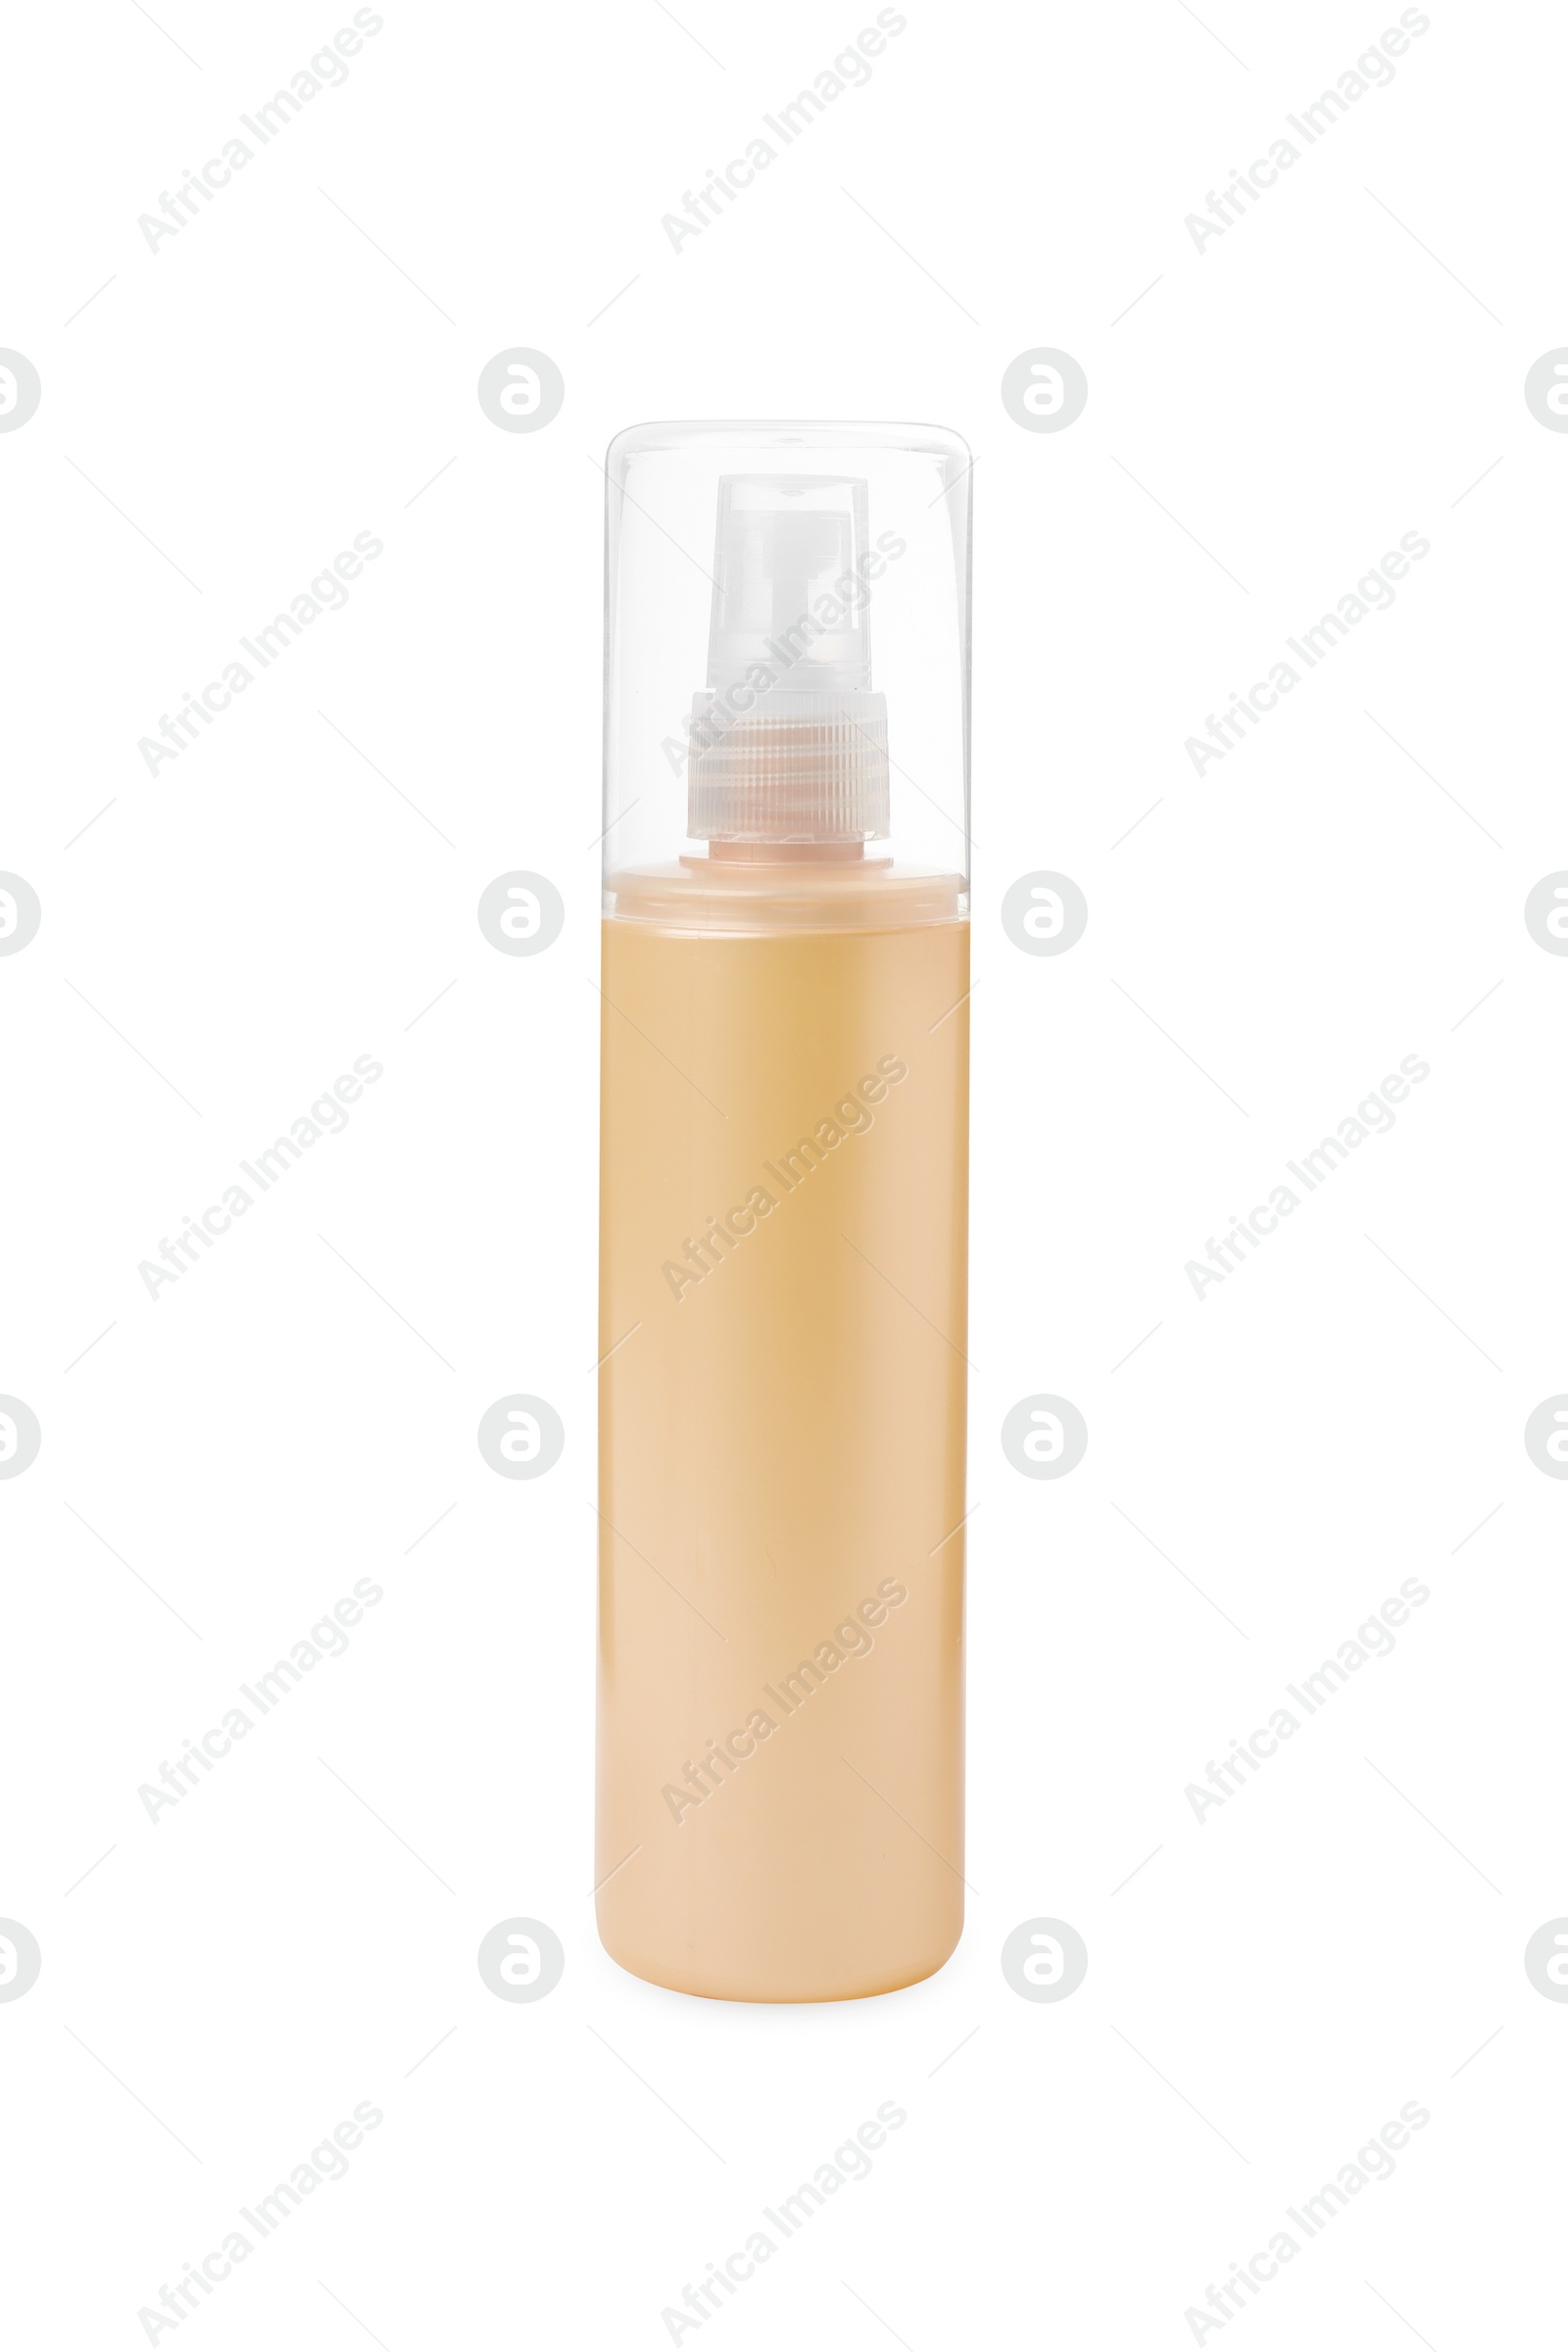 Photo of Spray bottle with hair thermal protection isolated on white